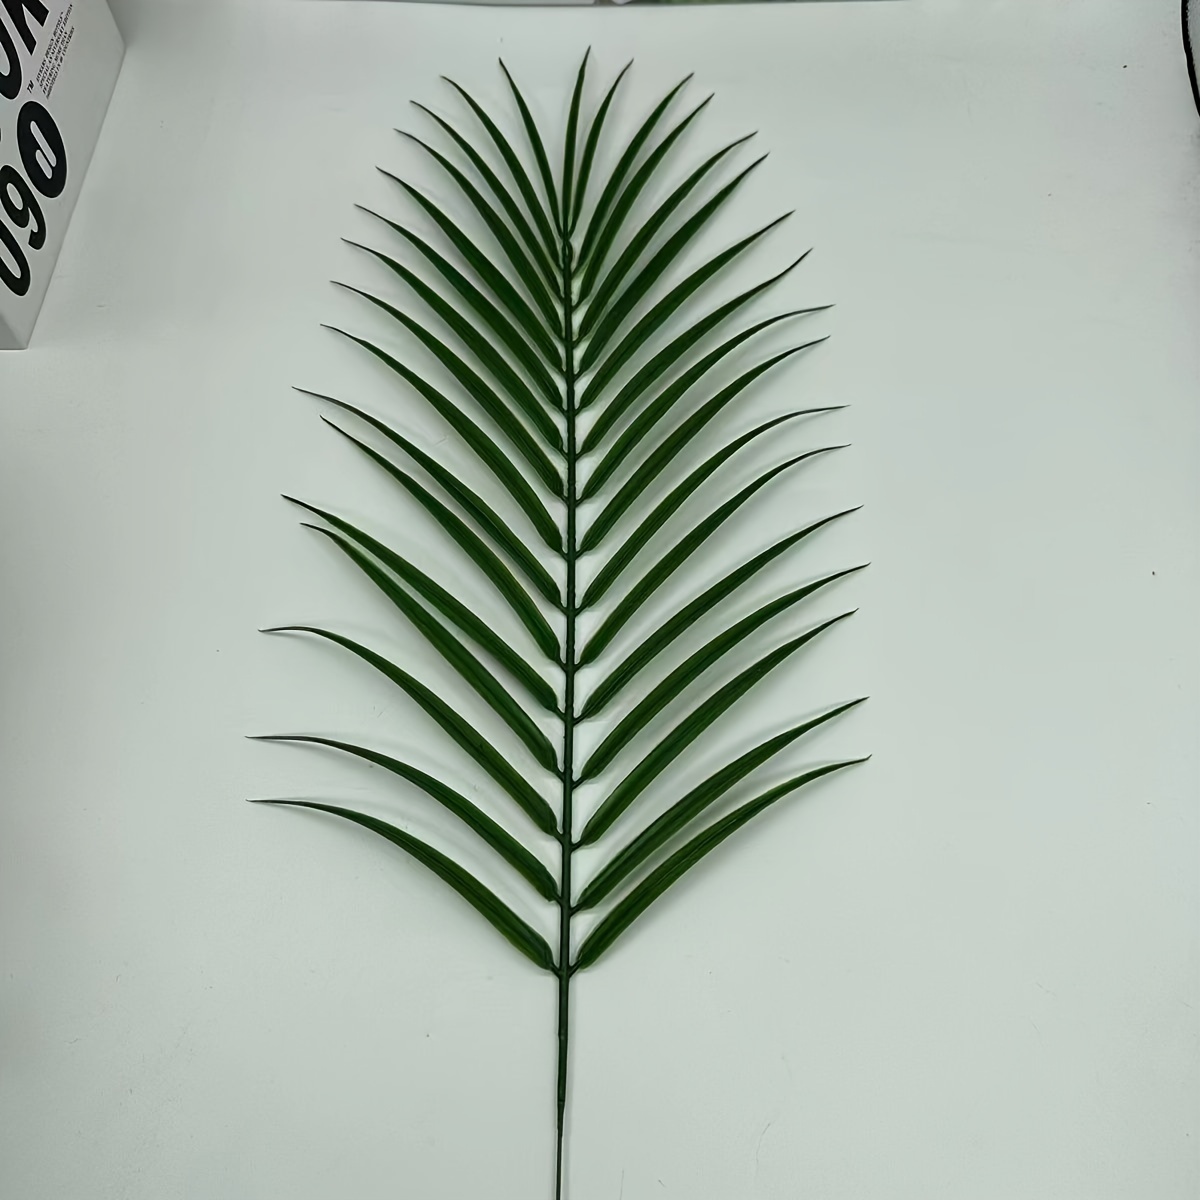 Large Artificial Tropical Palm Leaves, 13.8 By 11.4inch, Hawaiian